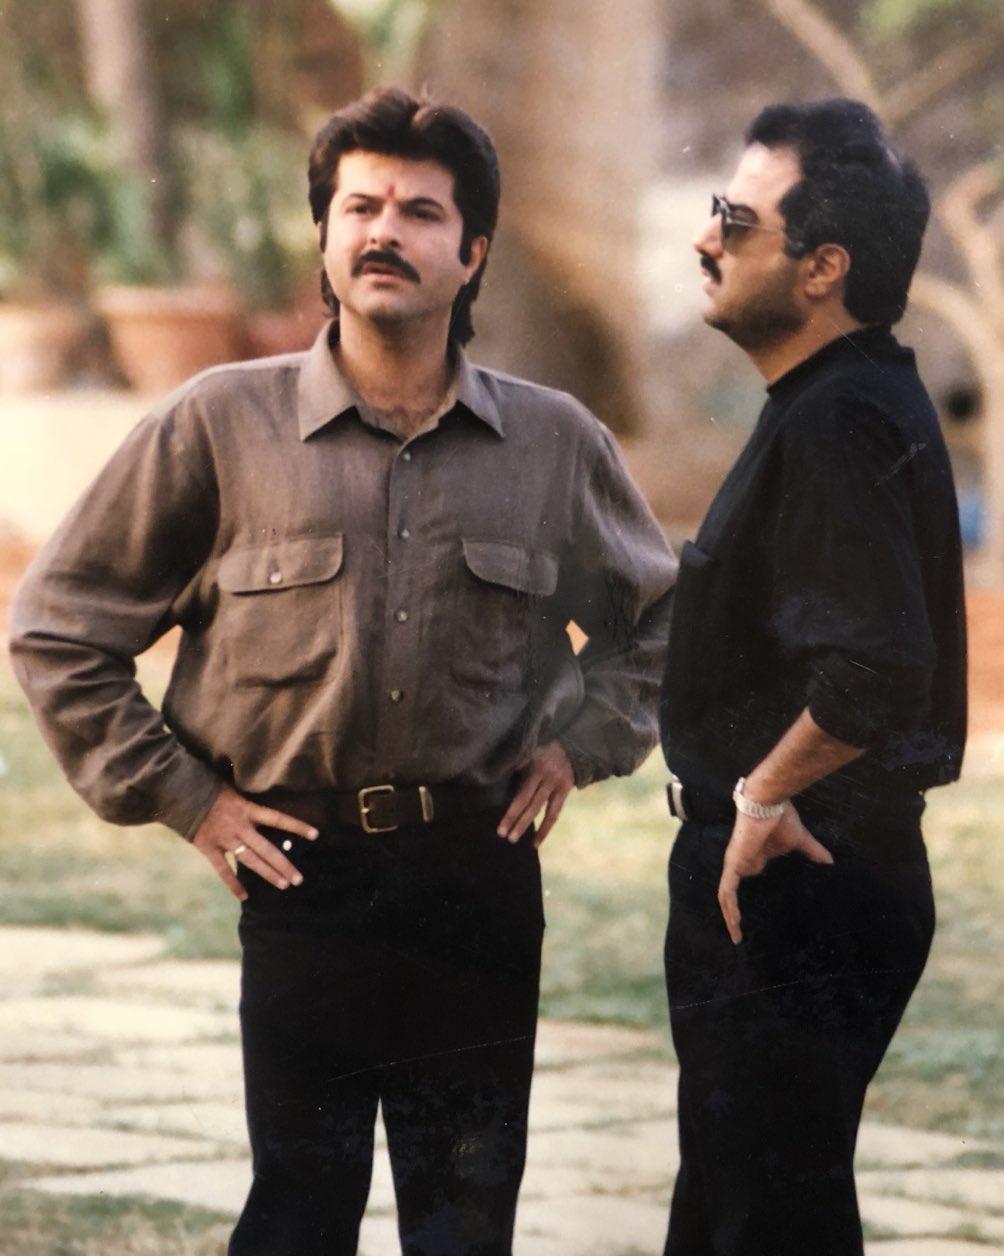 Swag runs in the family! Caught in a candid moment, Boney Kapoor and Anil Kapoor are seen having a conversation probably on the sets of a film